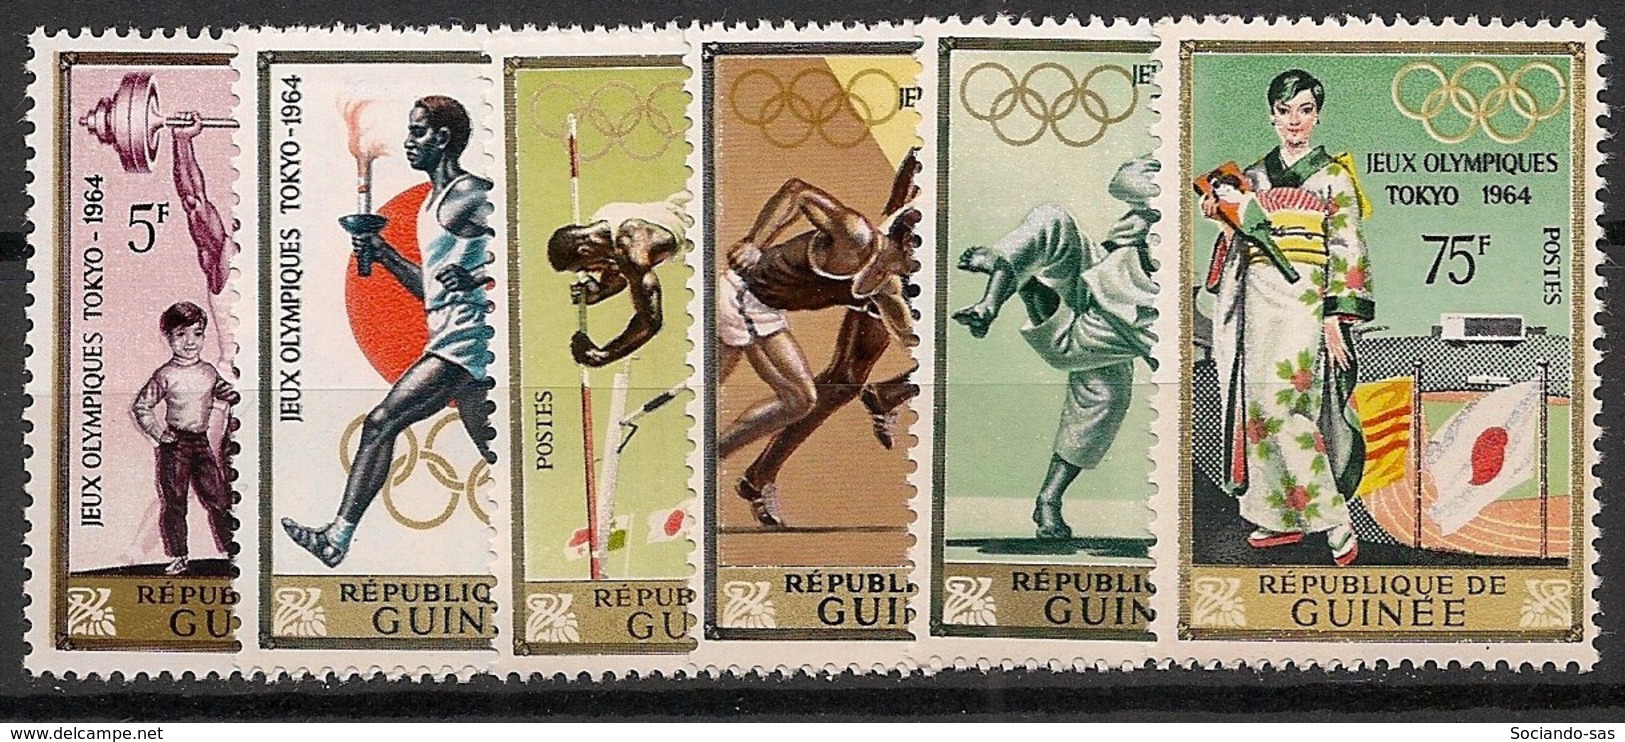 Guinée - 1964 - N°Yv. 217 à 222 - Olympics / Tokyo 64 - Neuf Luxe ** / MNH / Postfrisch - Sommer 1964: Tokio